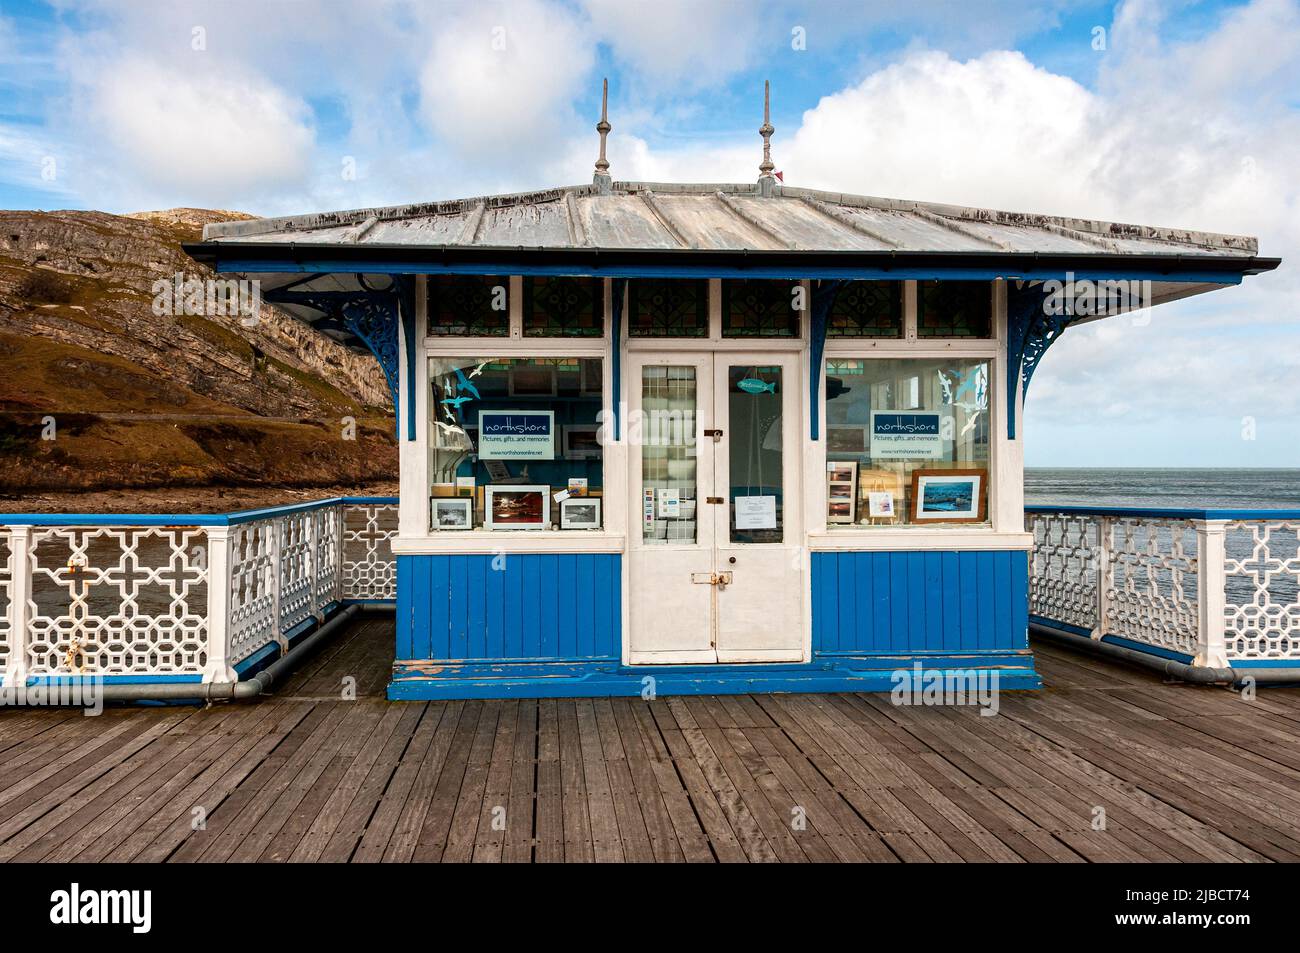 A blue and white painted wooden gift shop with windows and a hipped roof with overhanging eaves on the decking of the Grade ll listed Victorian Pier Stock Photo